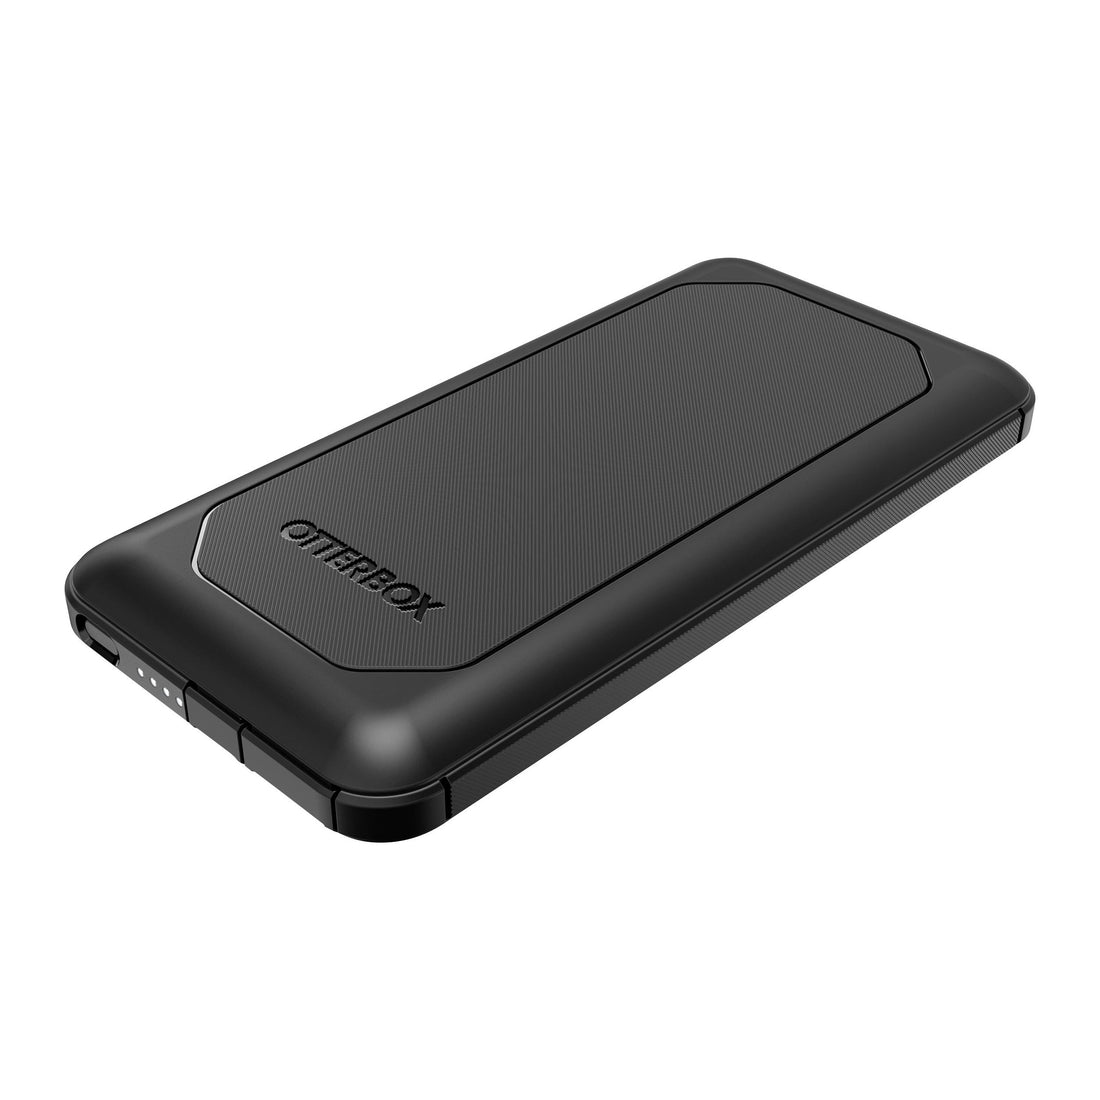 OtterBox Power Pack 10000 mAh Portable Charger for USB-Enabled Devices - Black (New)